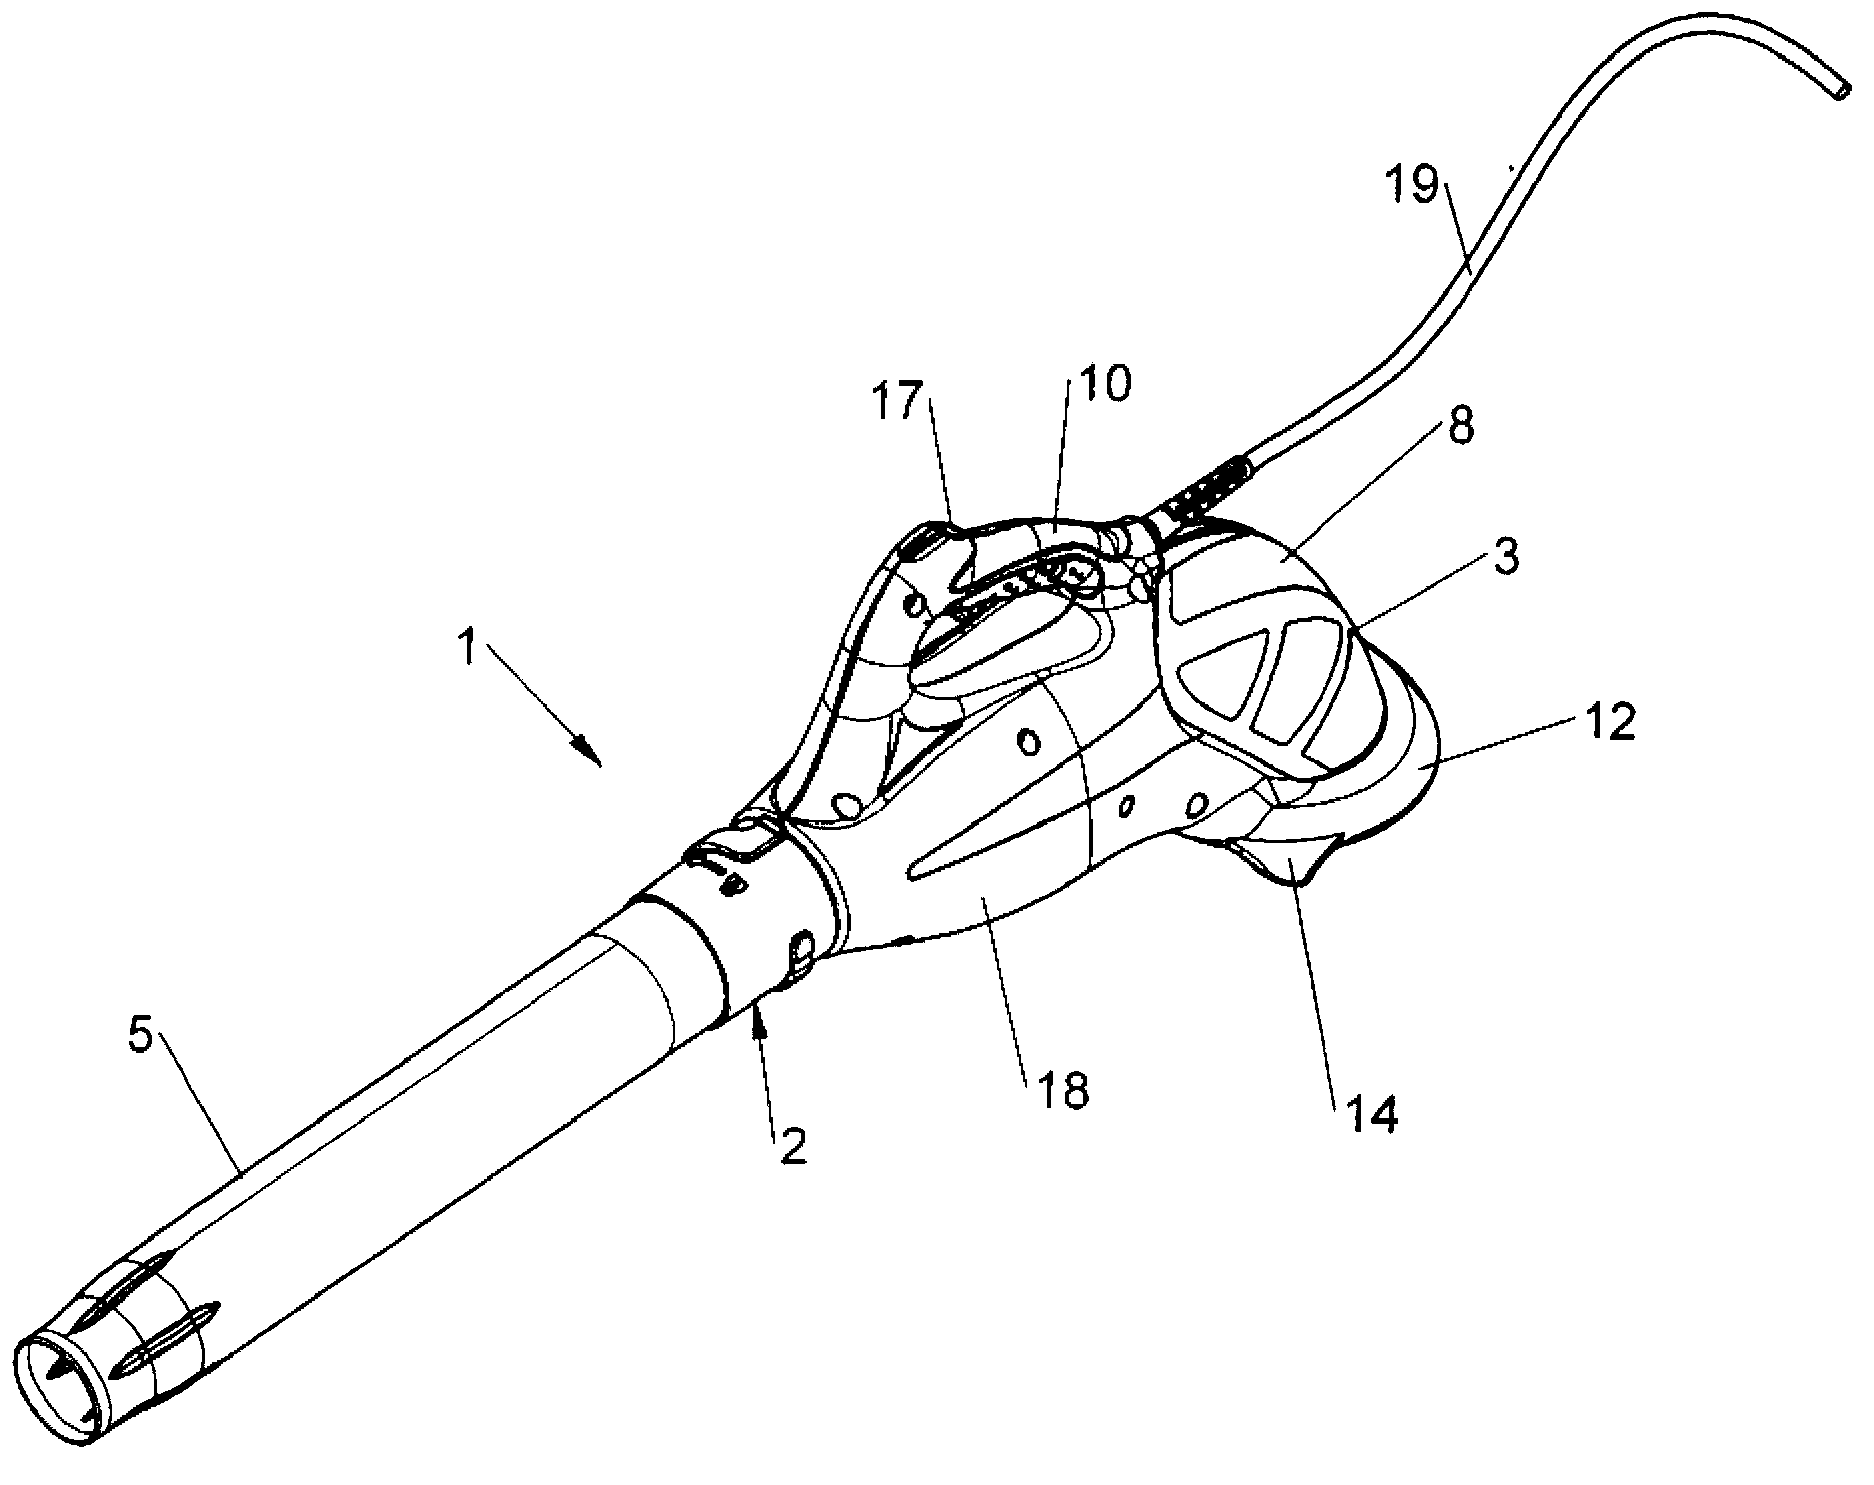 Hand-held electric blower